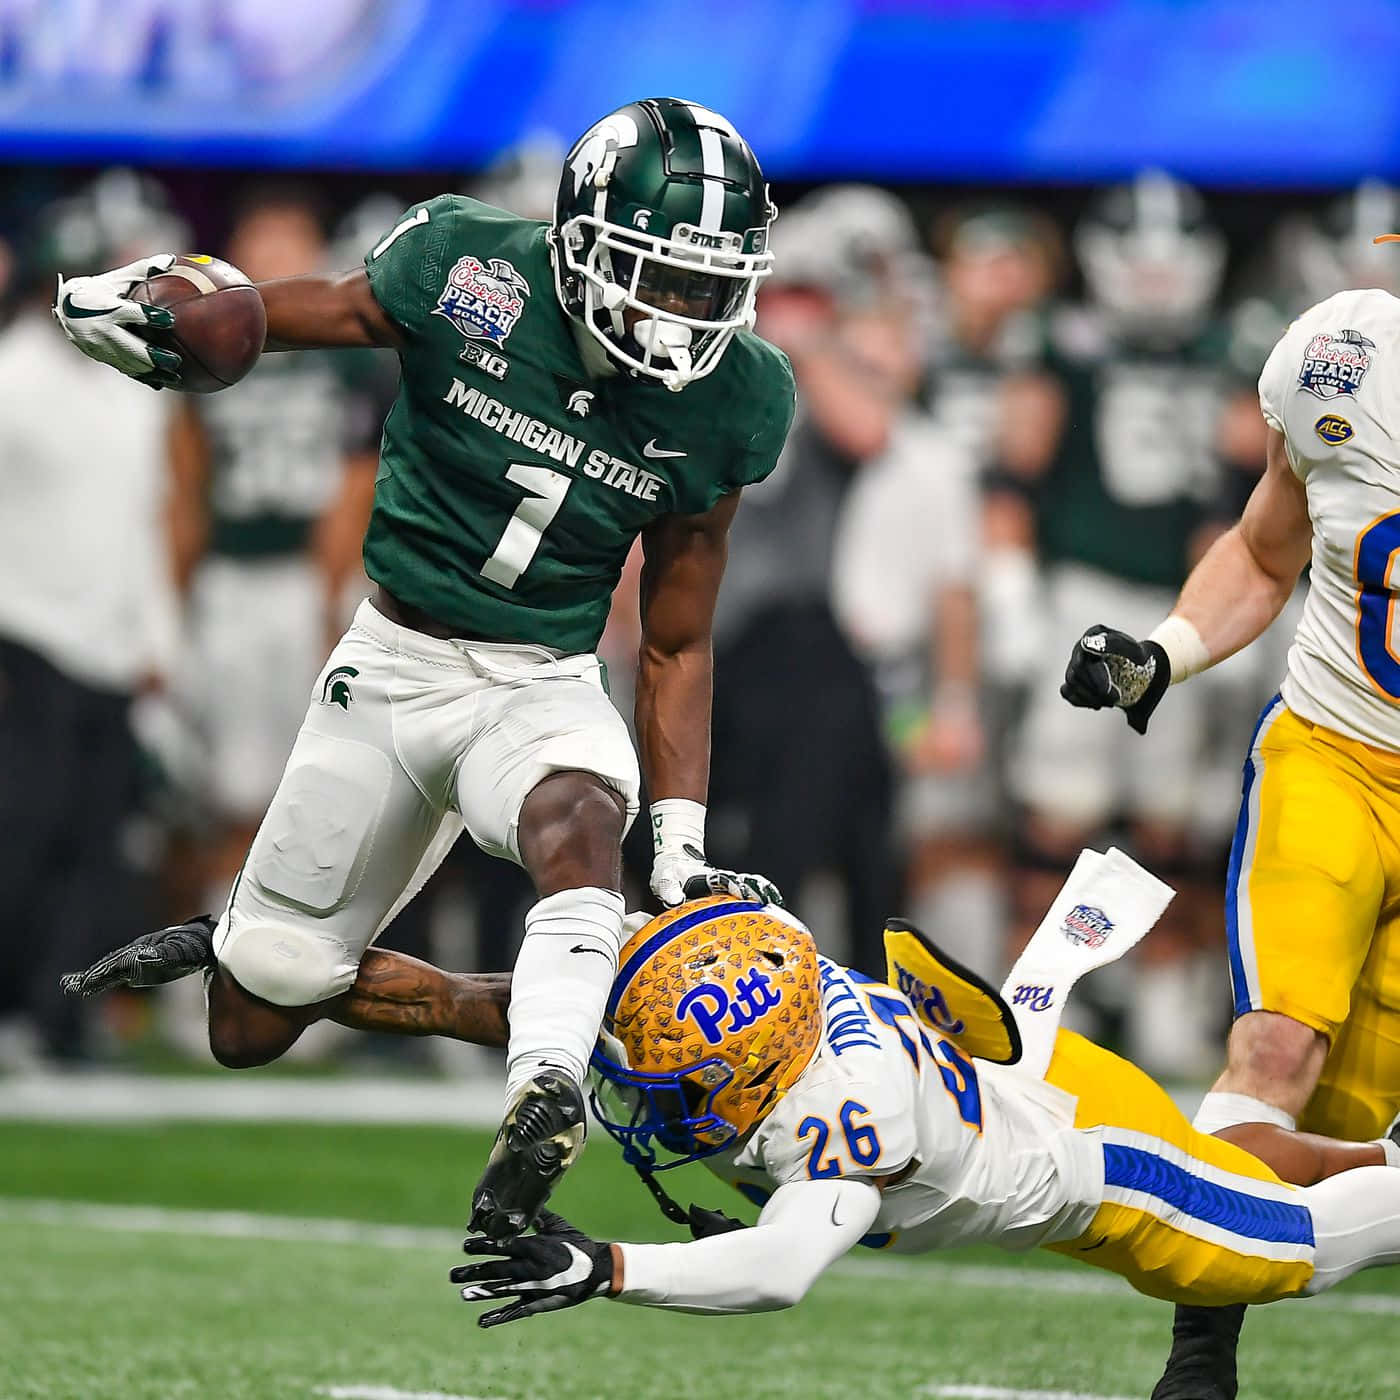 Michigan State Player Evades Tackle Wallpaper